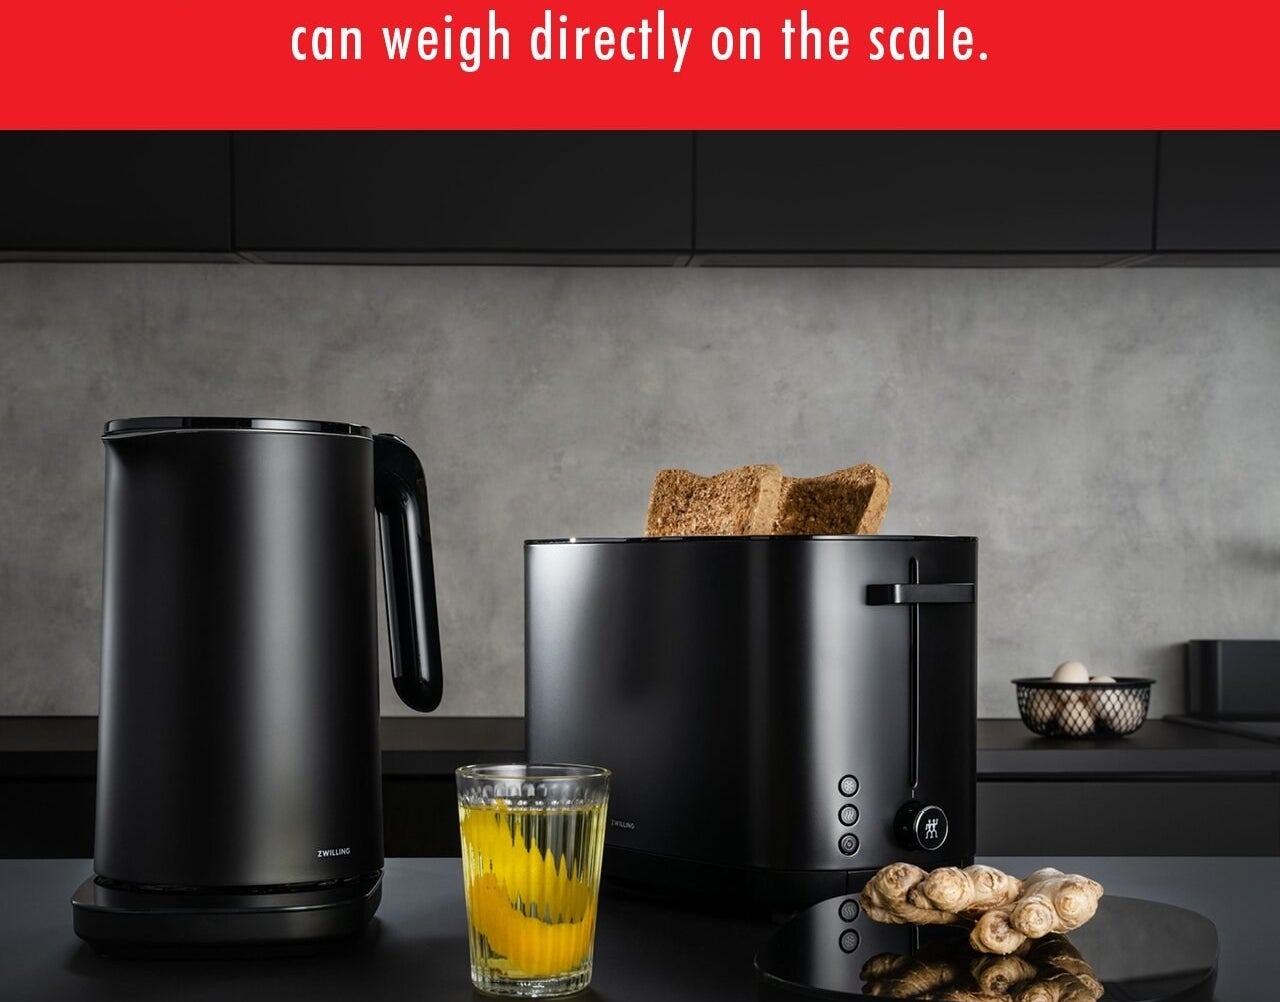 An image of a digital food scale next to other kitchen appliances